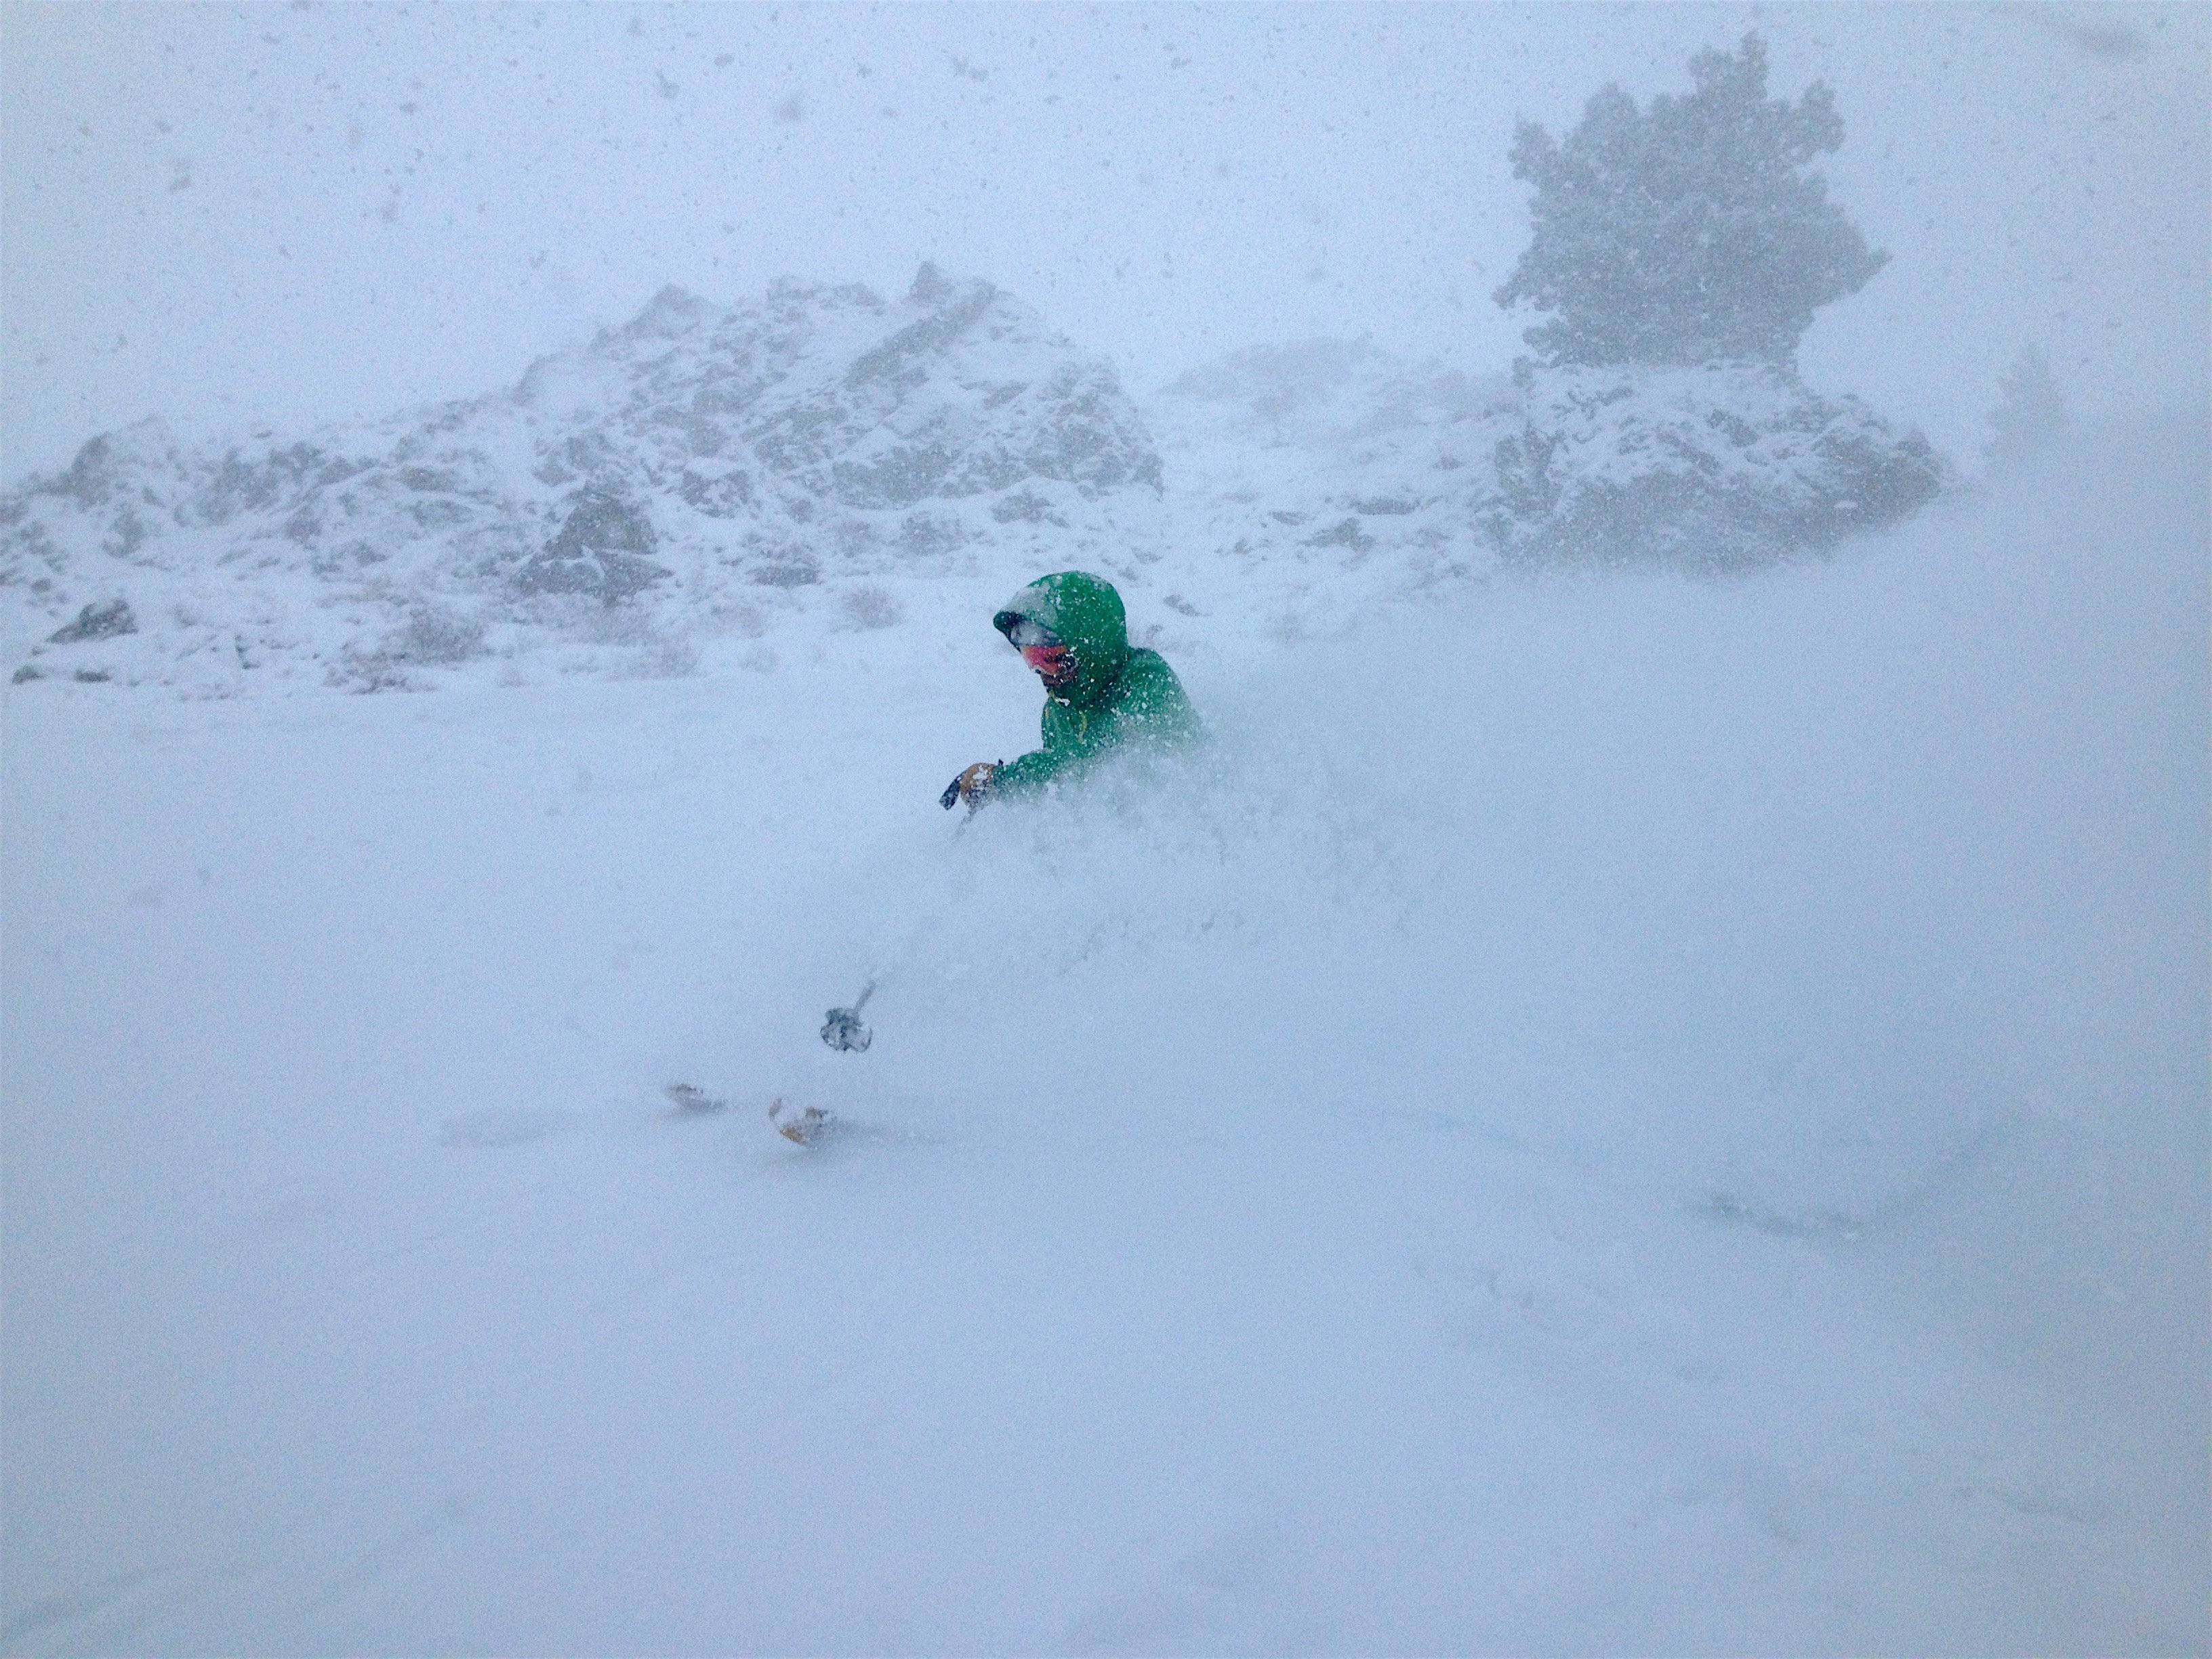 Billy getting some in the Alternates. photo: snowbrains